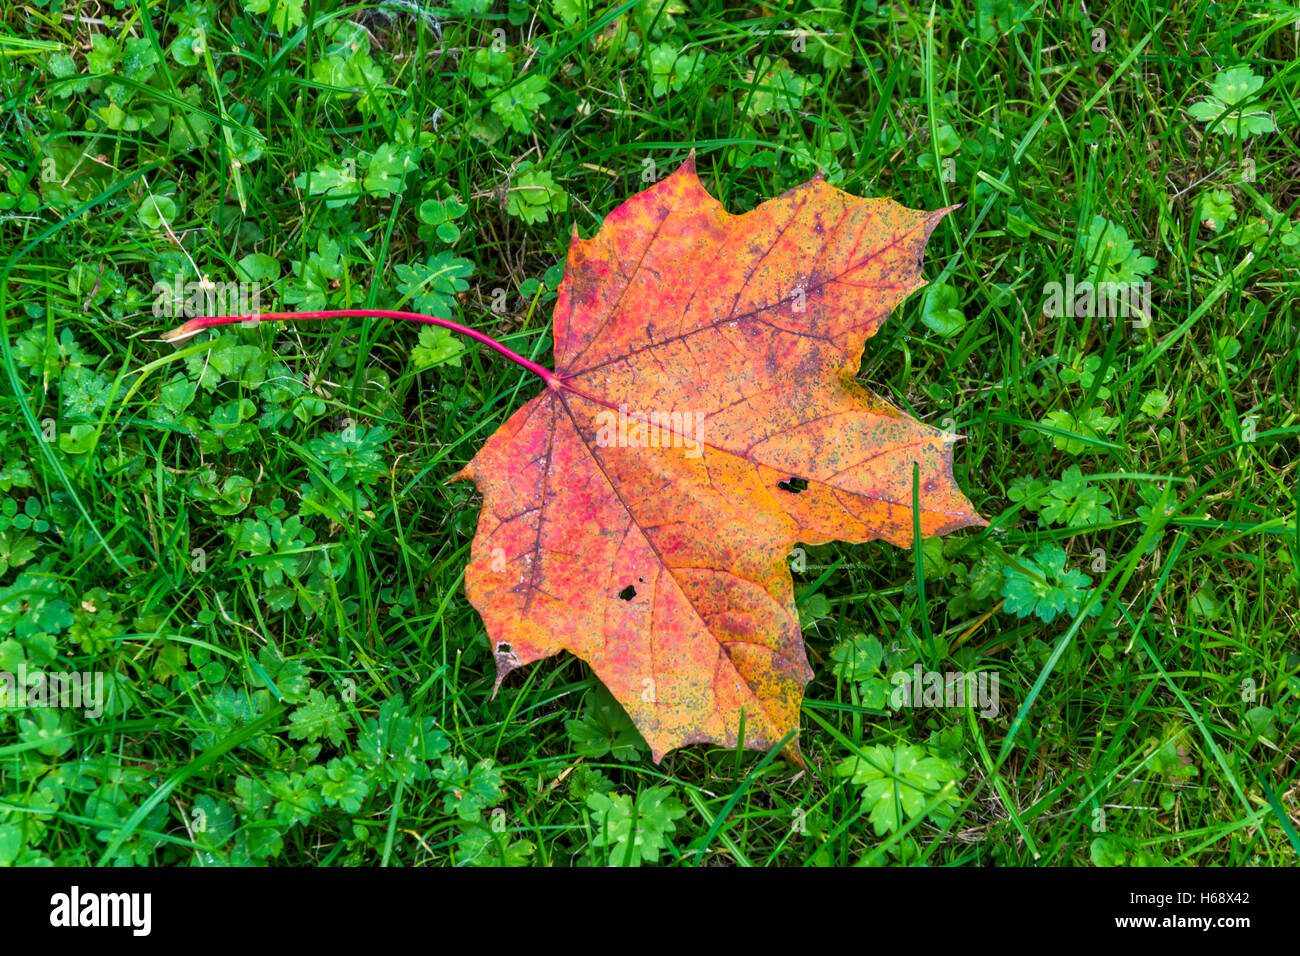 Red orange leaf lying in green fresh grass, suggesting that the autumn is already here. Stock Photo